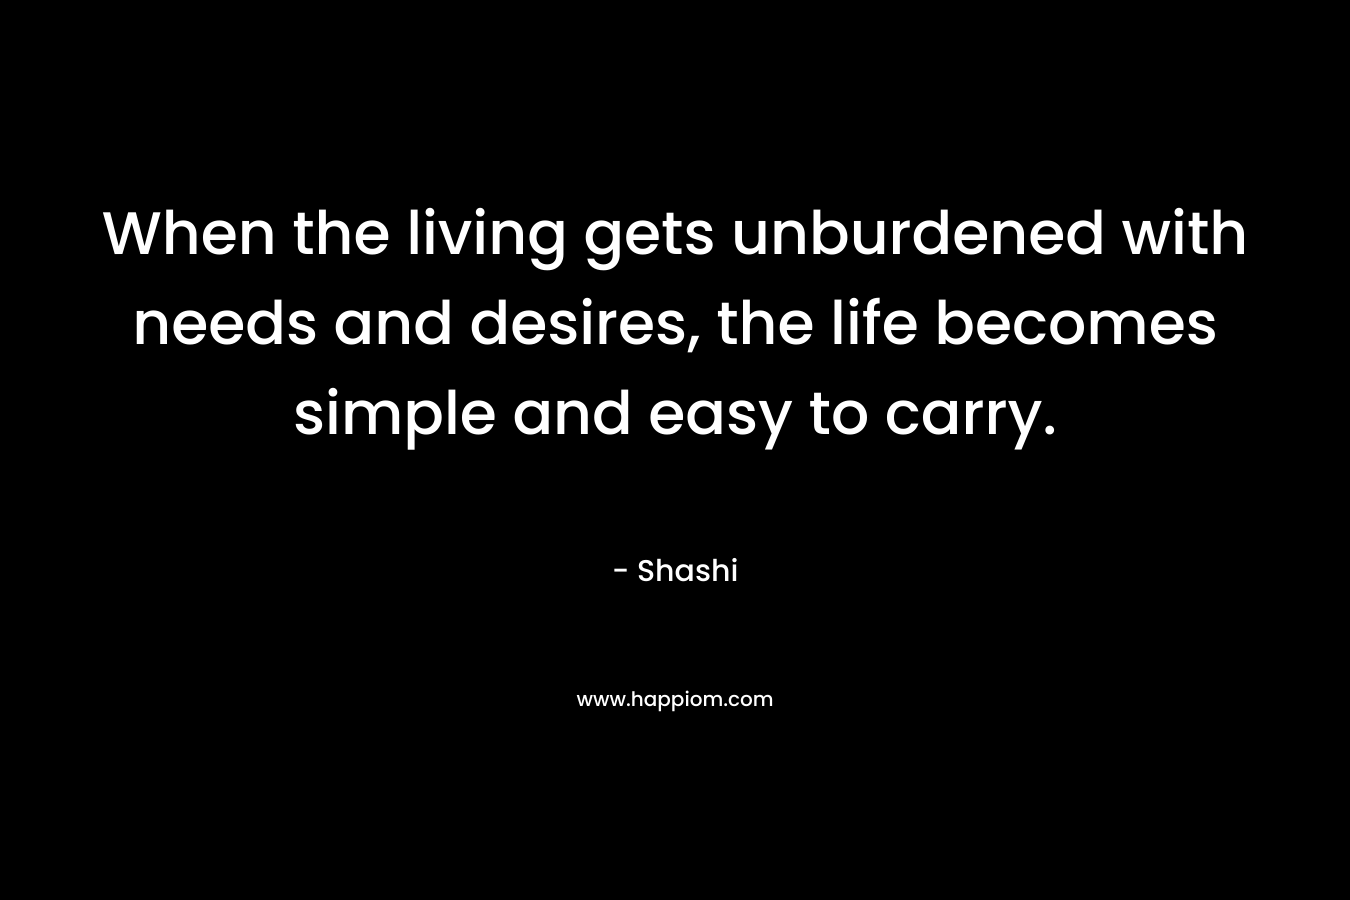 When the living gets unburdened with needs and desires, the life becomes simple and easy to carry.